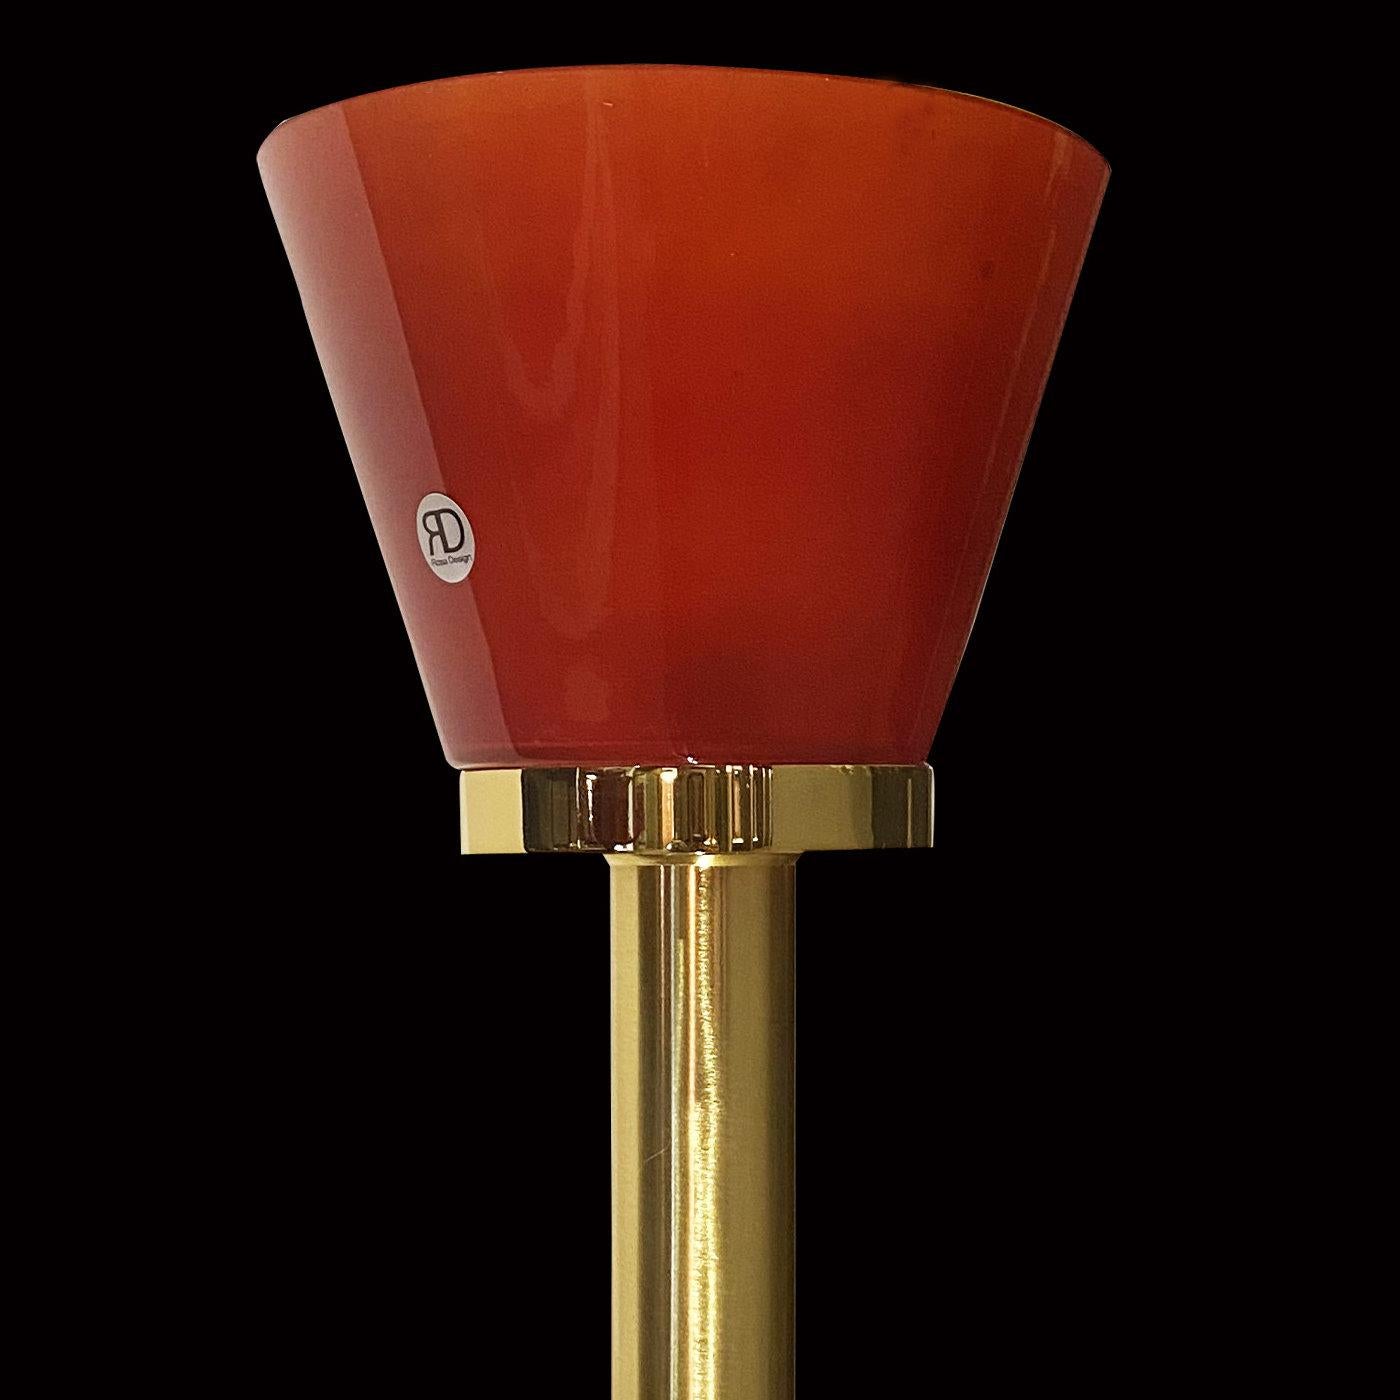 Distinguished by a luxe and essential design, this table lamp is ideal to suit exclusive hospitality contexts or modern homes with a warm color palette. Its pedestal metal frame boasting a brushed, polished finish sustains the upside-down conical